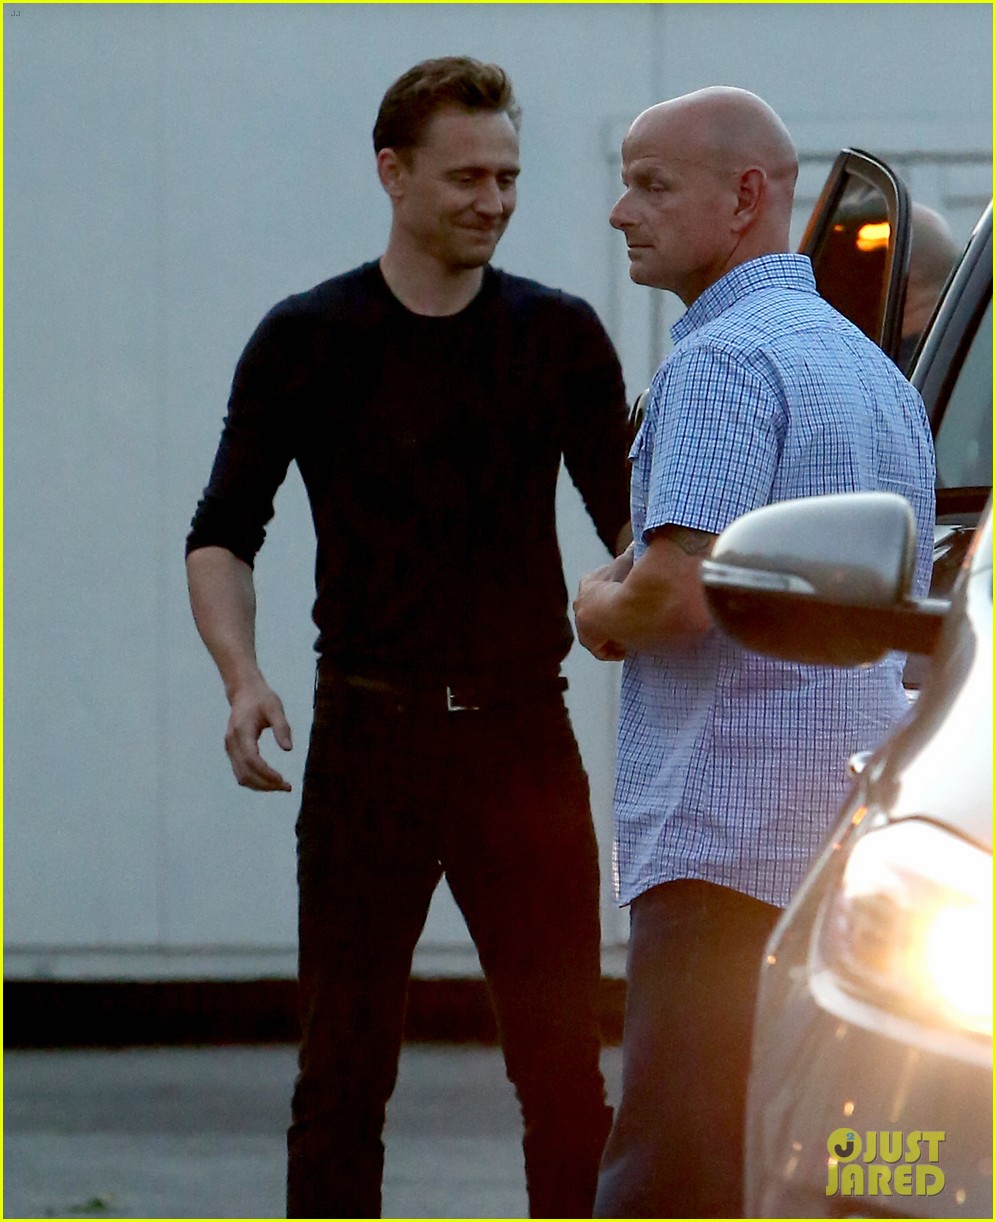 taylor swift tom hiddleston go on double date for lunch 10